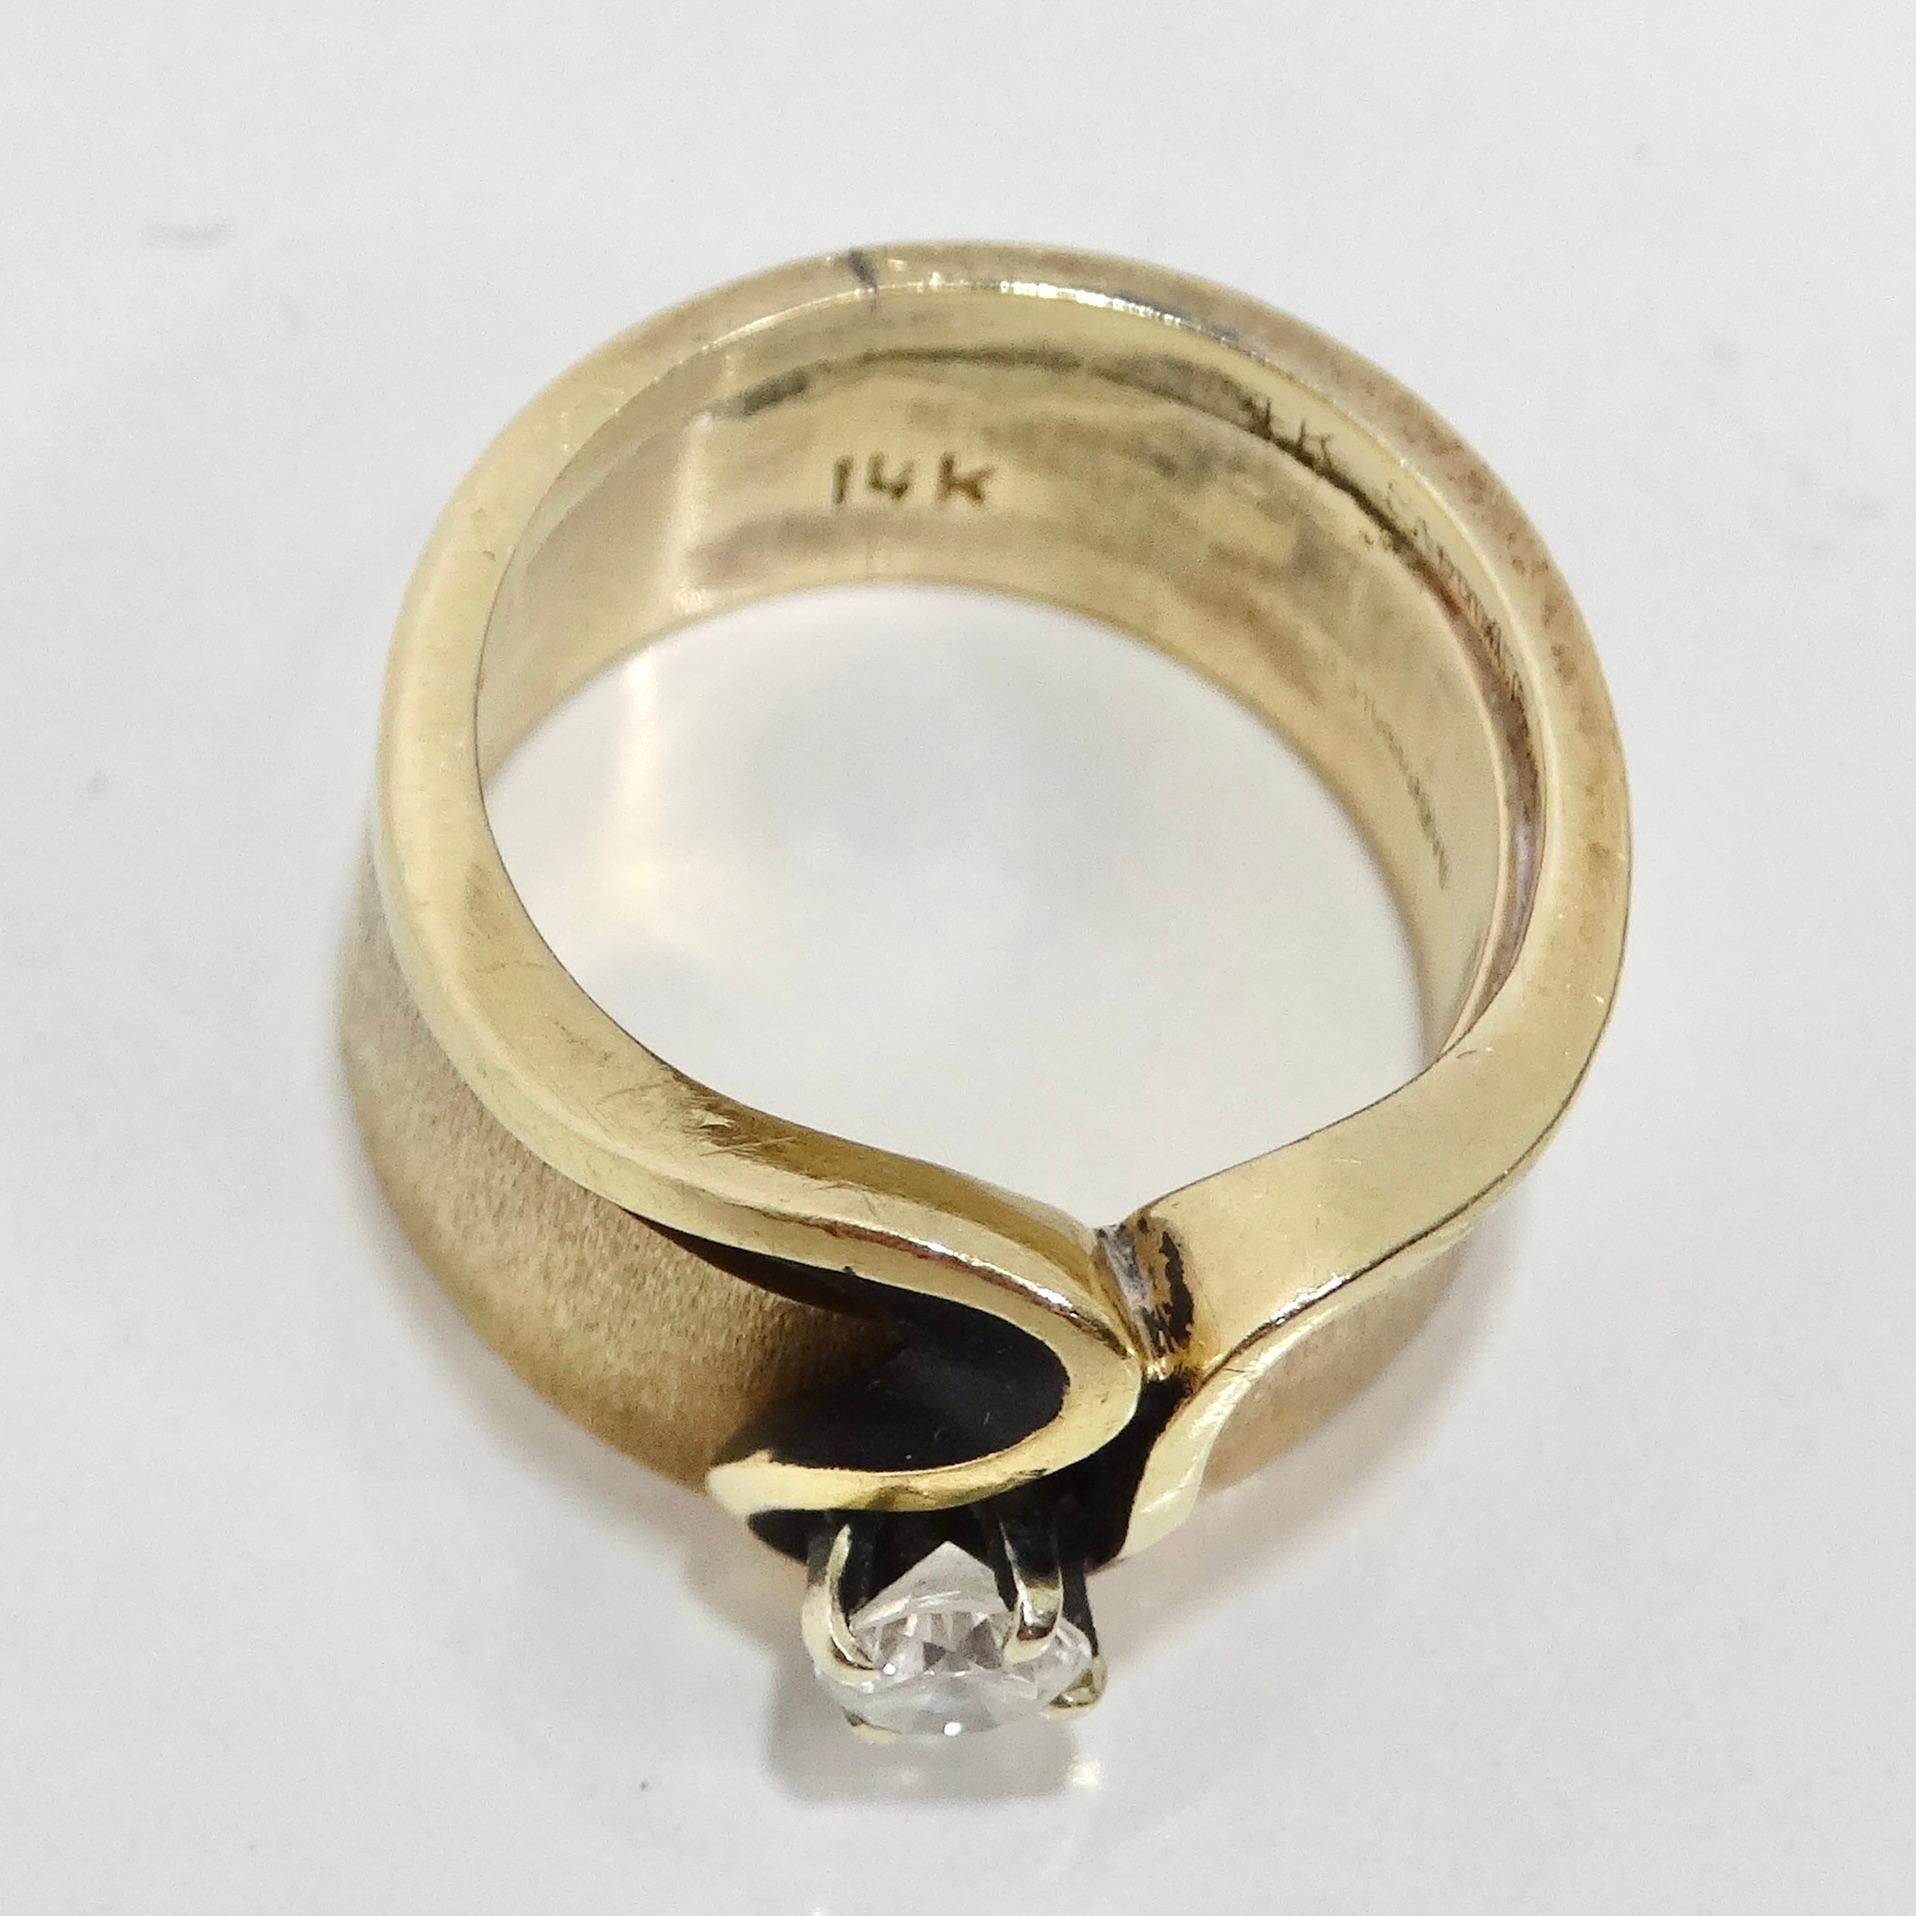 Elevate your style with the 14K Gold 1960s Diamond Ring, a classic and luxurious ring that encapsulates the beauty of the 1960s with an abstract wave engraving and a stunning 0.25 carat round clear diamond. The thick band ring in 14k yellow gold is